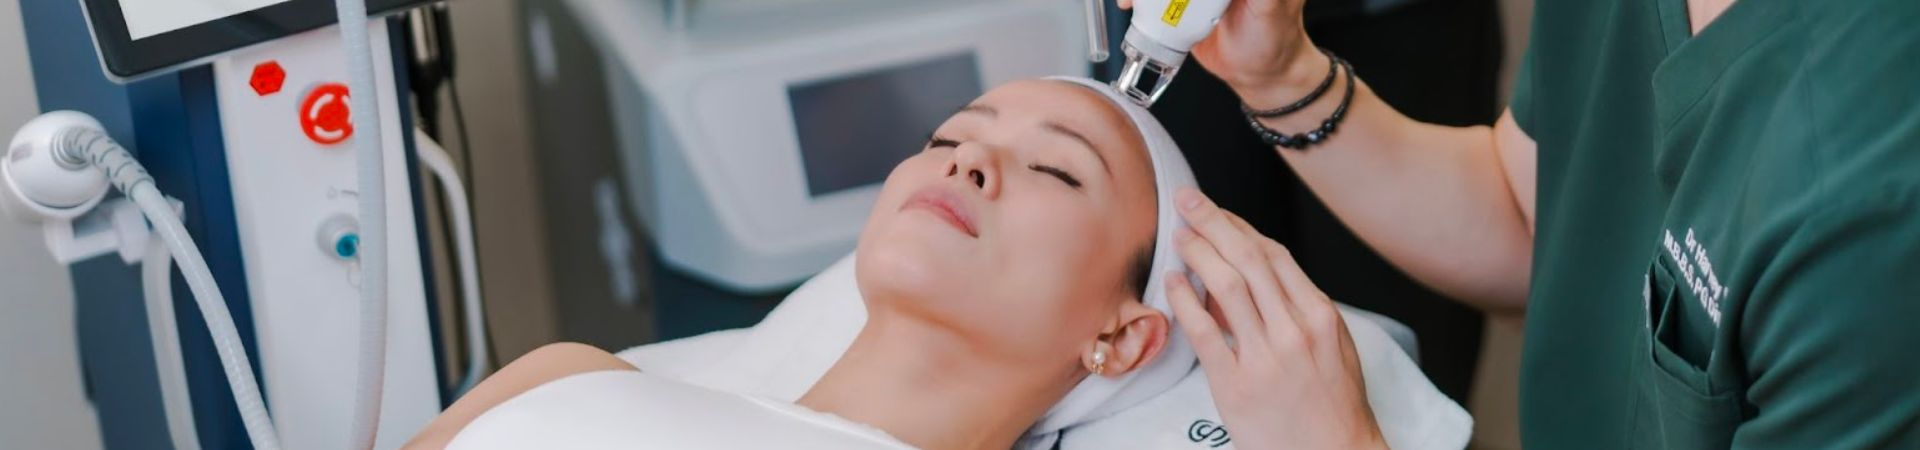 best beauty treatments singapore for face, hair and body